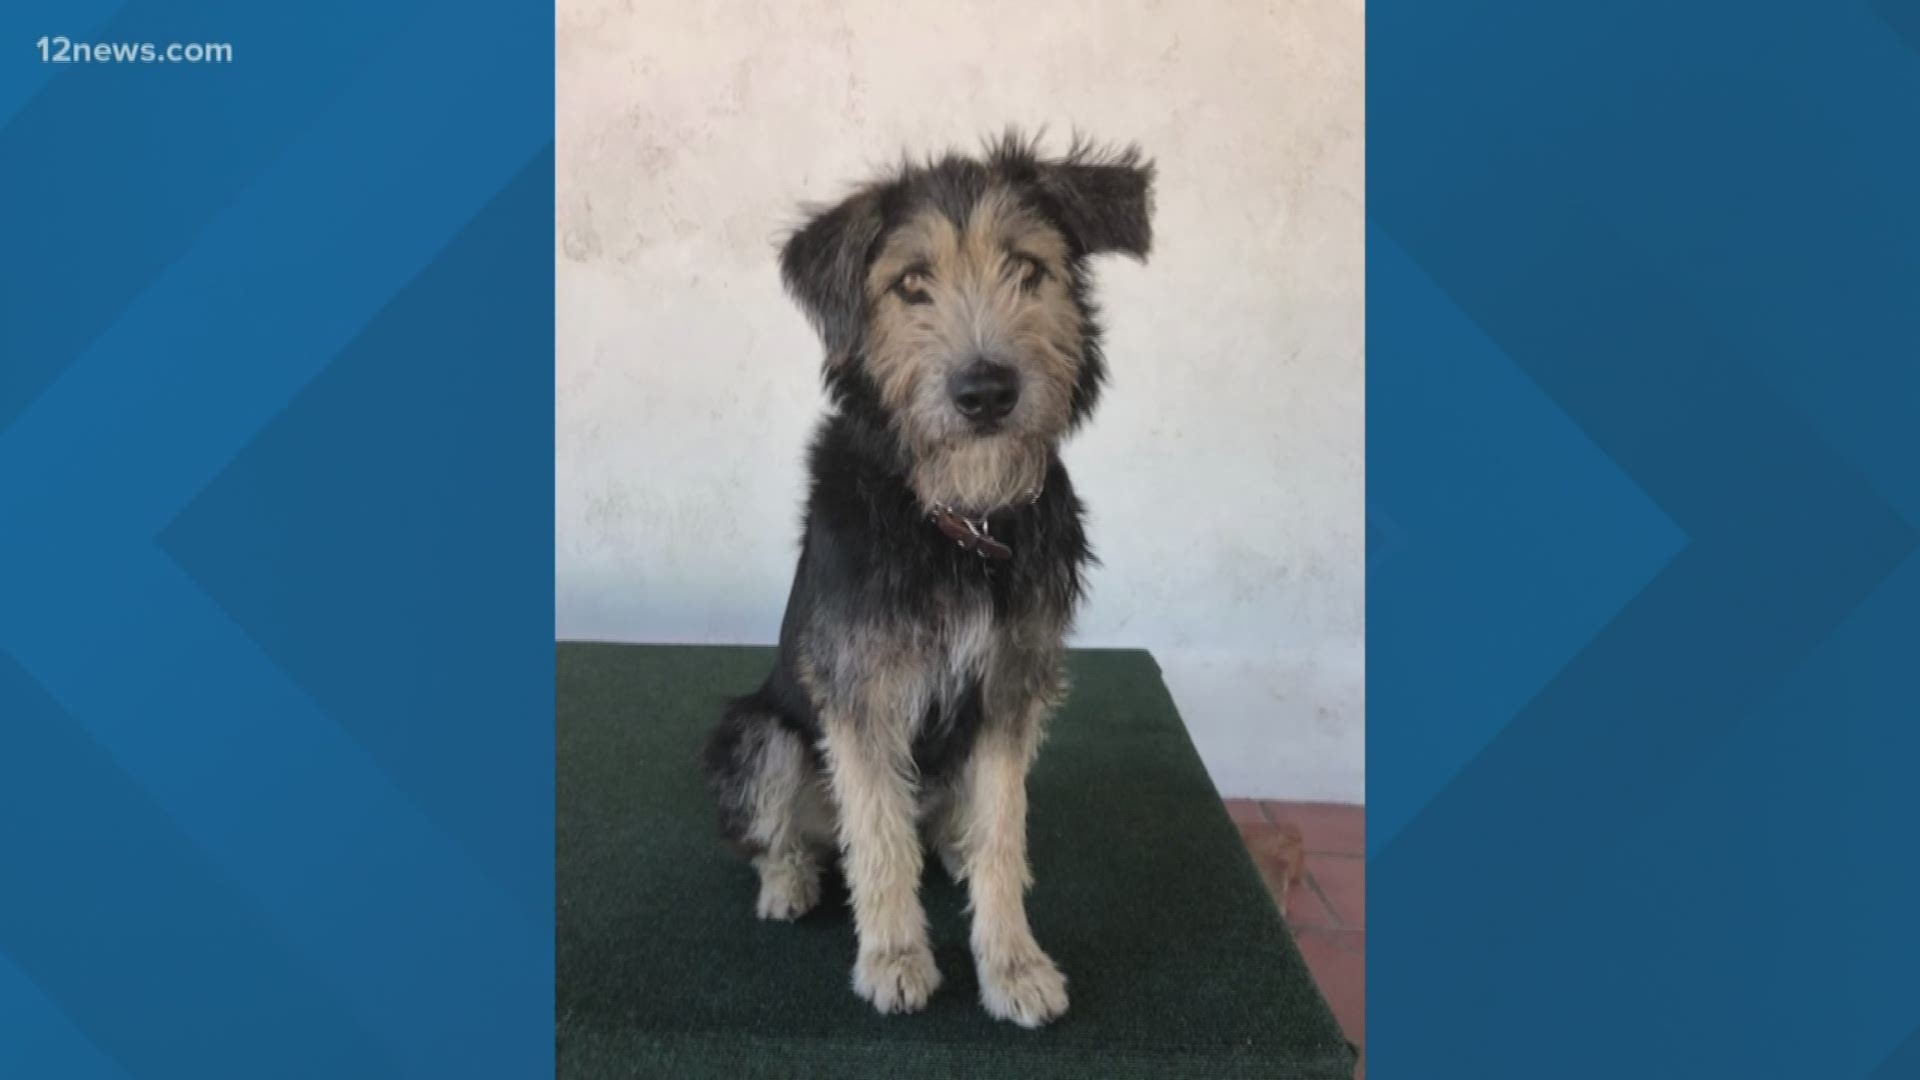 Monte is a 2-year-old terrier mix and he's on his way to becoming a movie star. Filmmakers found him at Halo Animal Rescue in Phoenix and adopted him last year. He will be starring in Disney's remake of "Lady and the Tramp".